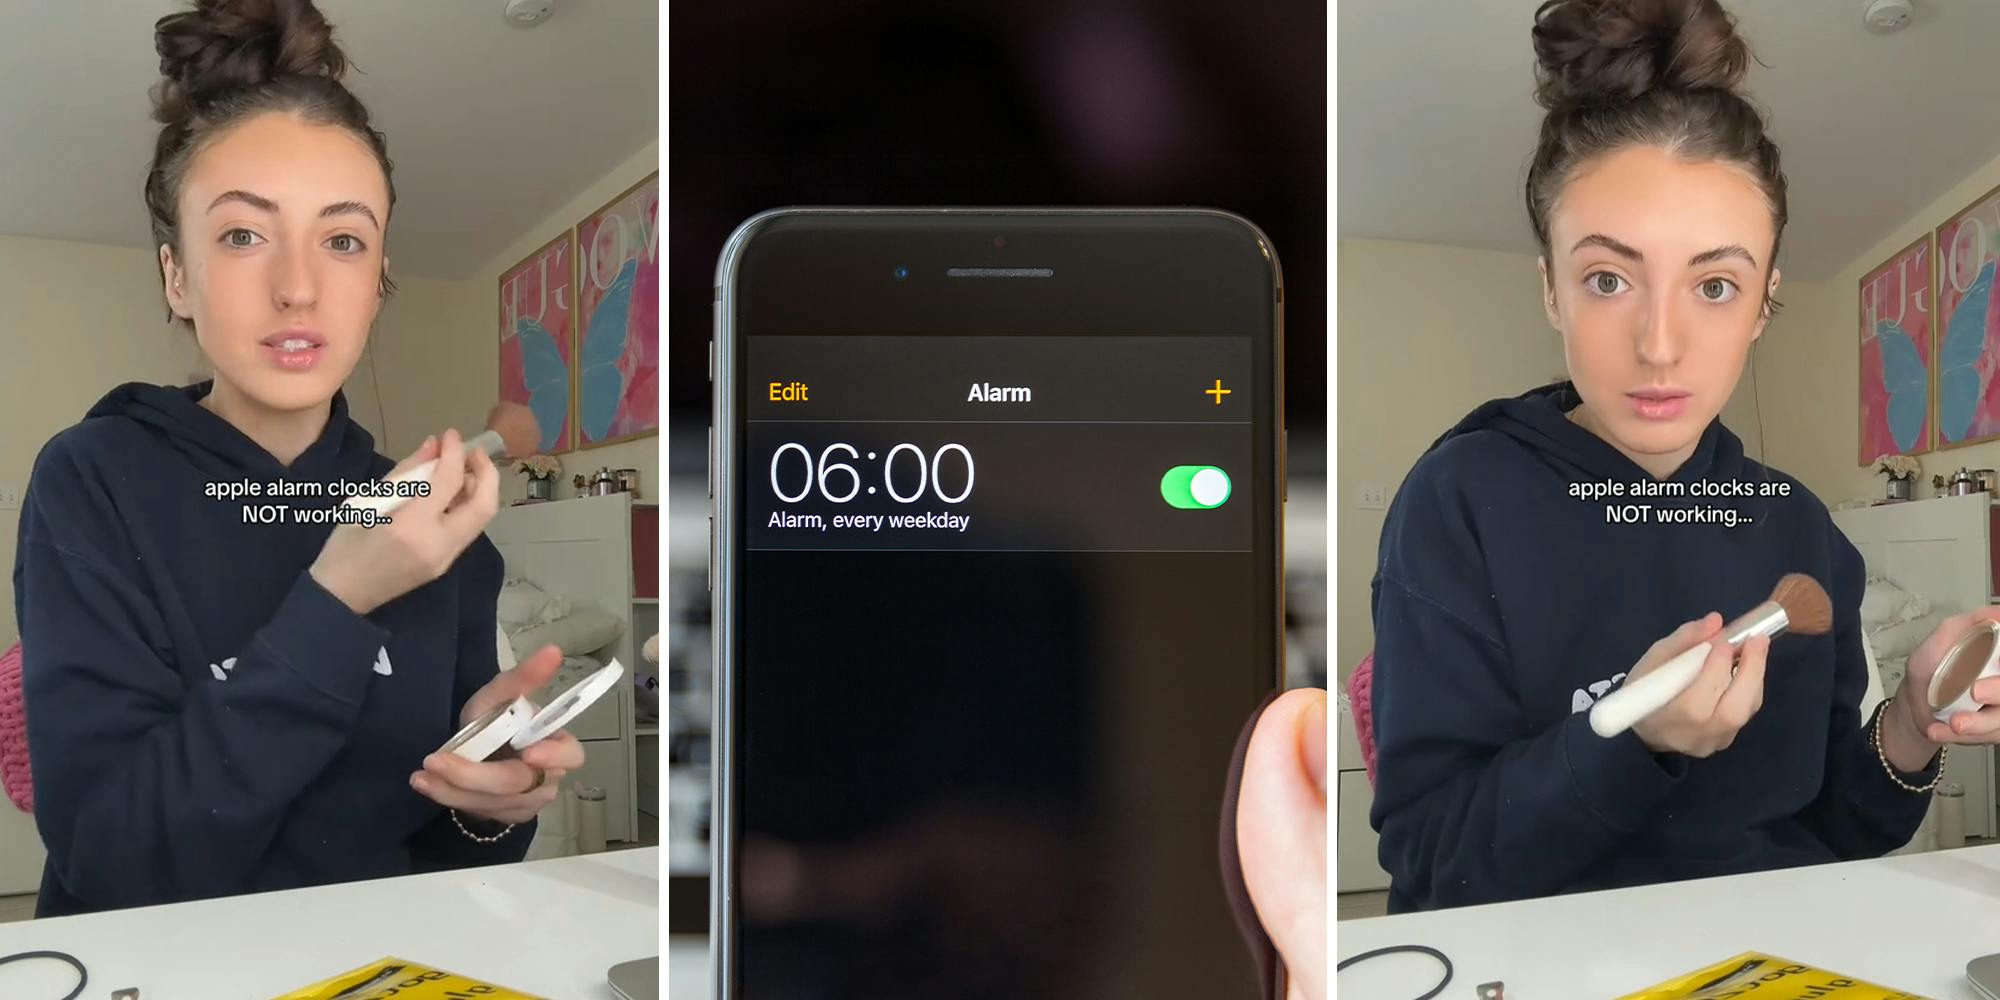 Woman Slams iPhone’s Alarm Clock for Failing to Wake Her Up